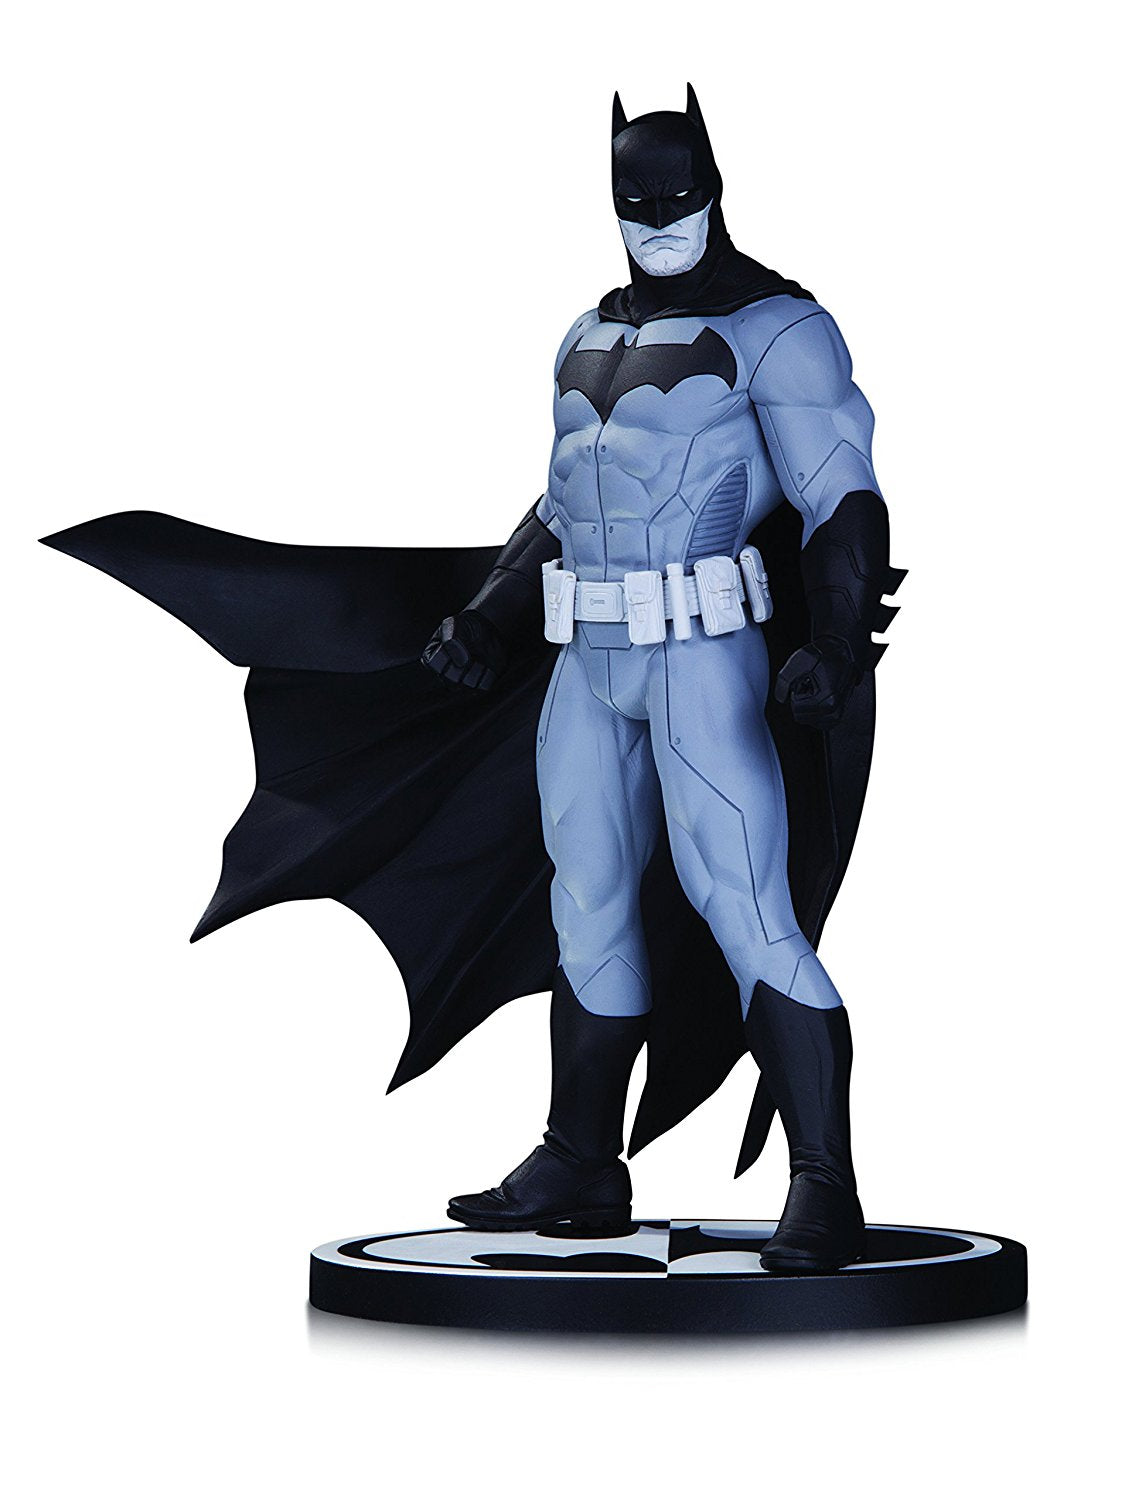 Dc Collectibles Batman Fabok Statue By Jason, Black/White - Statue - The Hooded Goblin